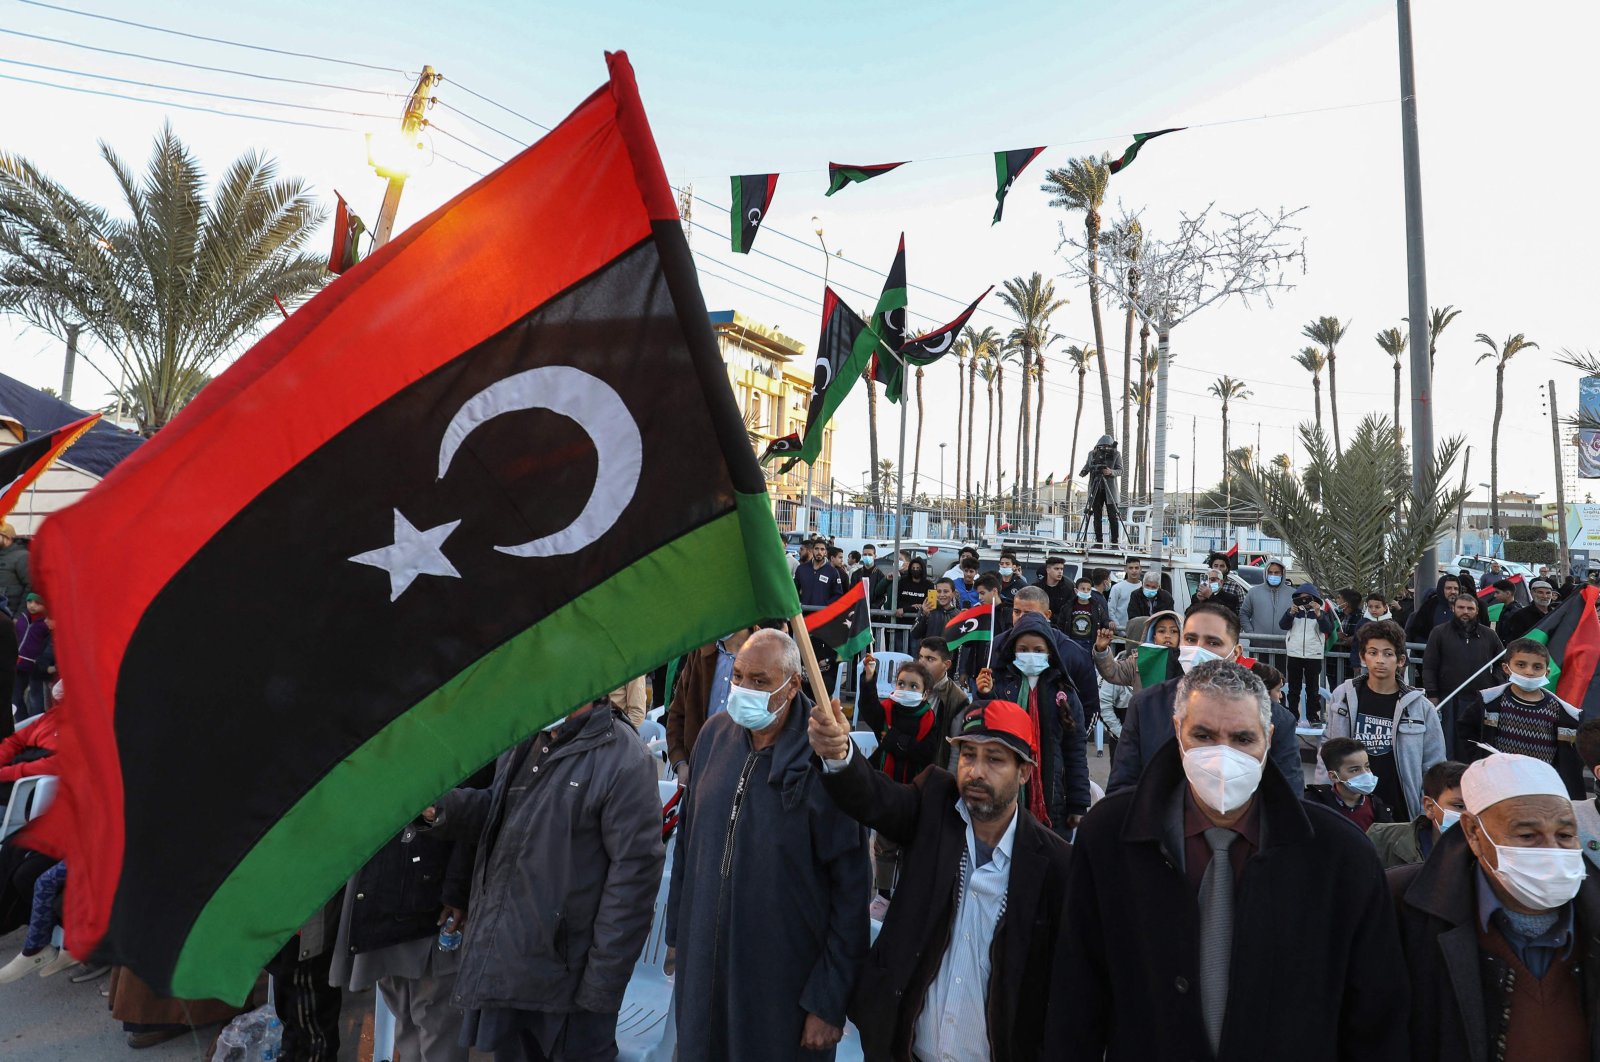 People gather in the coastal Libyan city of Tajura, east of the capital Tripoli on Feb. 16, 2022, as they commemorate the eve of the 11th anniversary of the uprising that toppled longtime strongman Moammar Gadhafi. (AFP Photo)